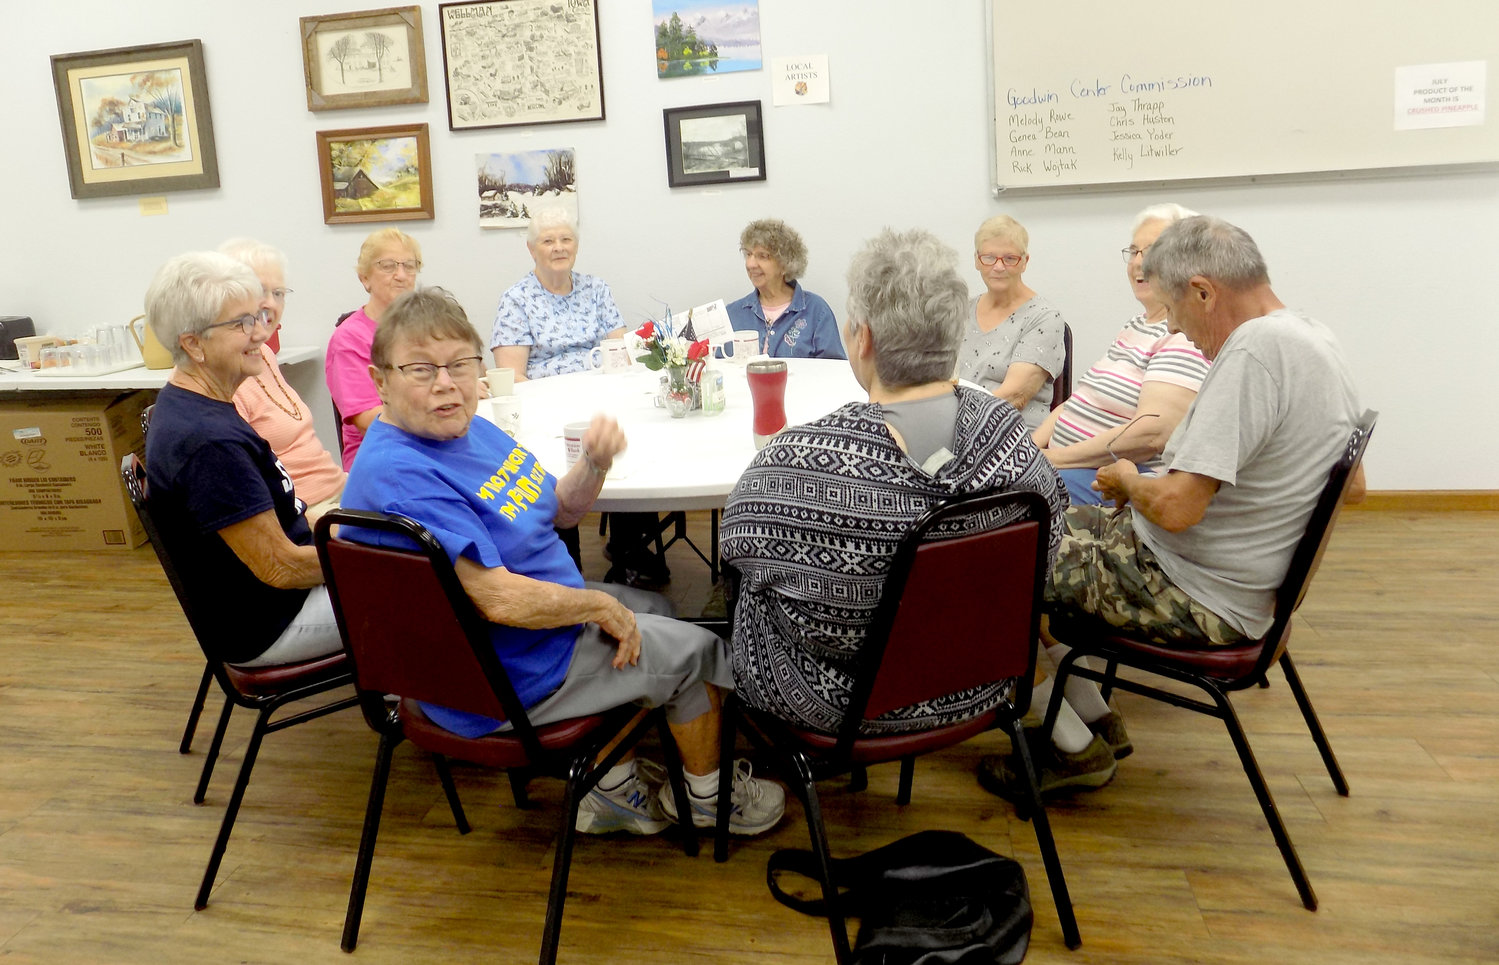 Morning coffee and conversation delight Wellman seniors at Goodwin Dining Center.